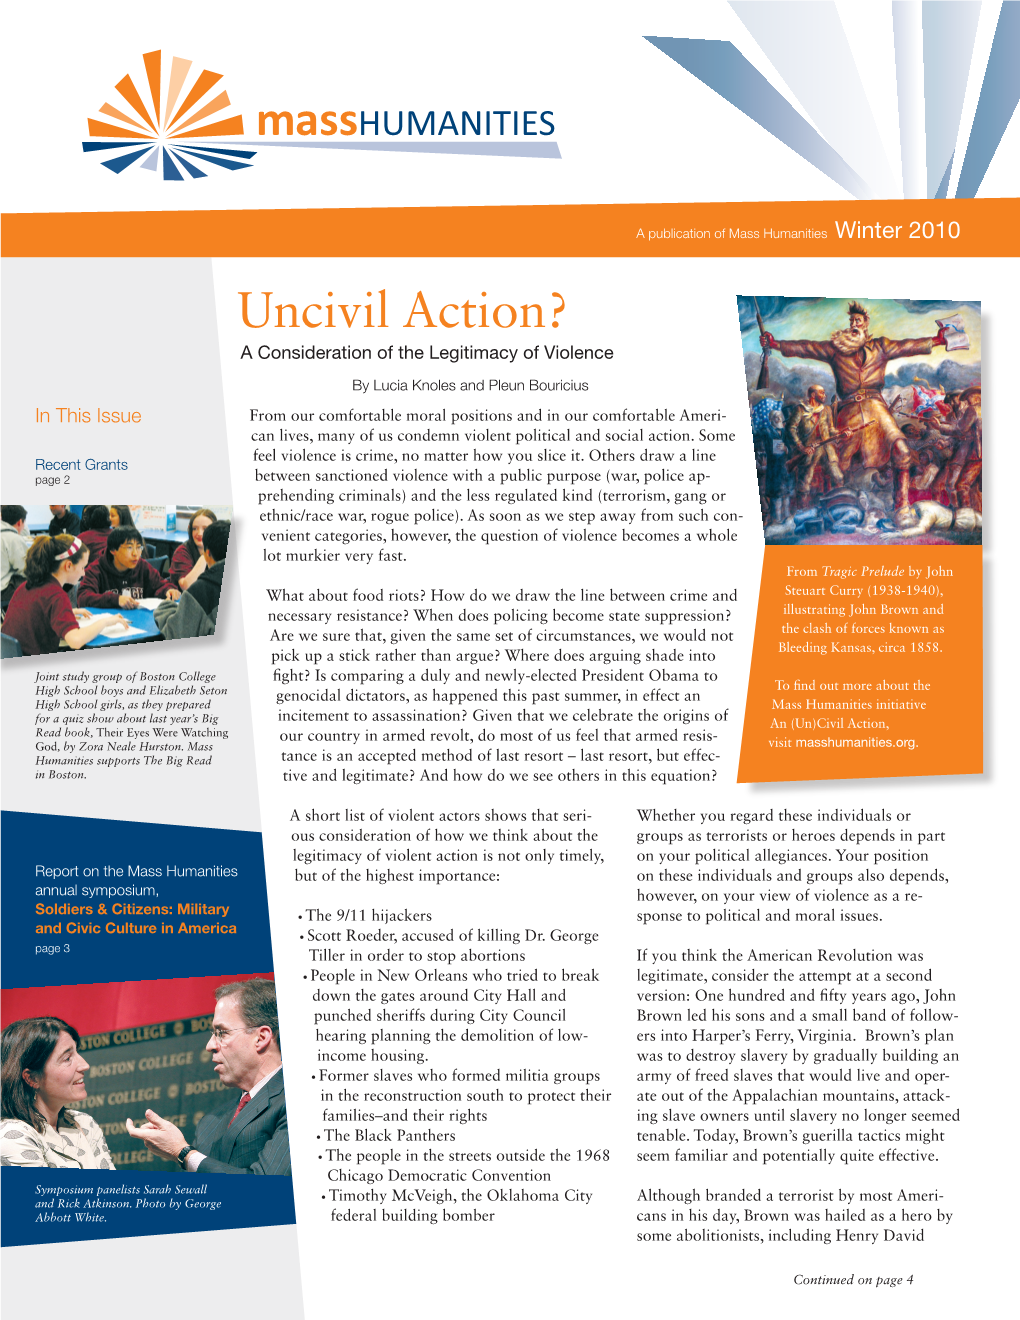 Uncivil Action? a Consideration of the Legitimacy of Violence